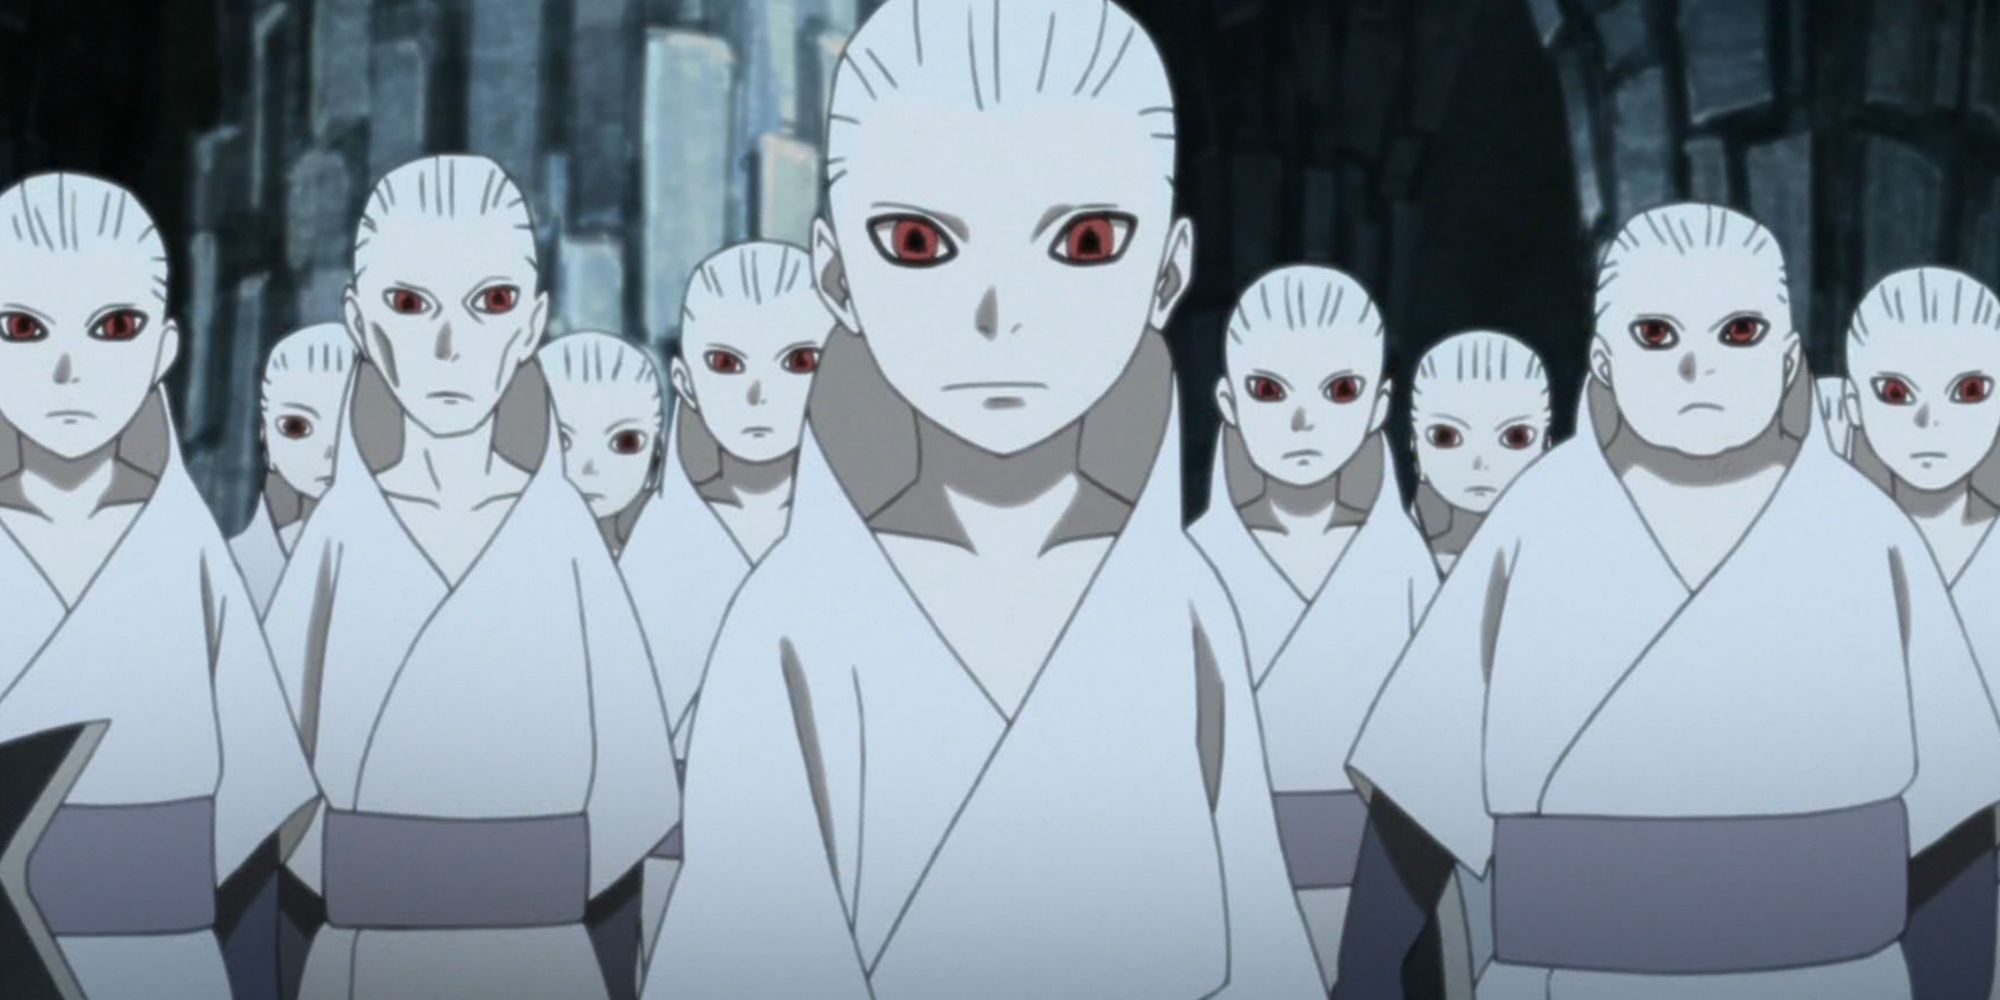 Shin Uchiha stands in front of a group of his clones in Boruto